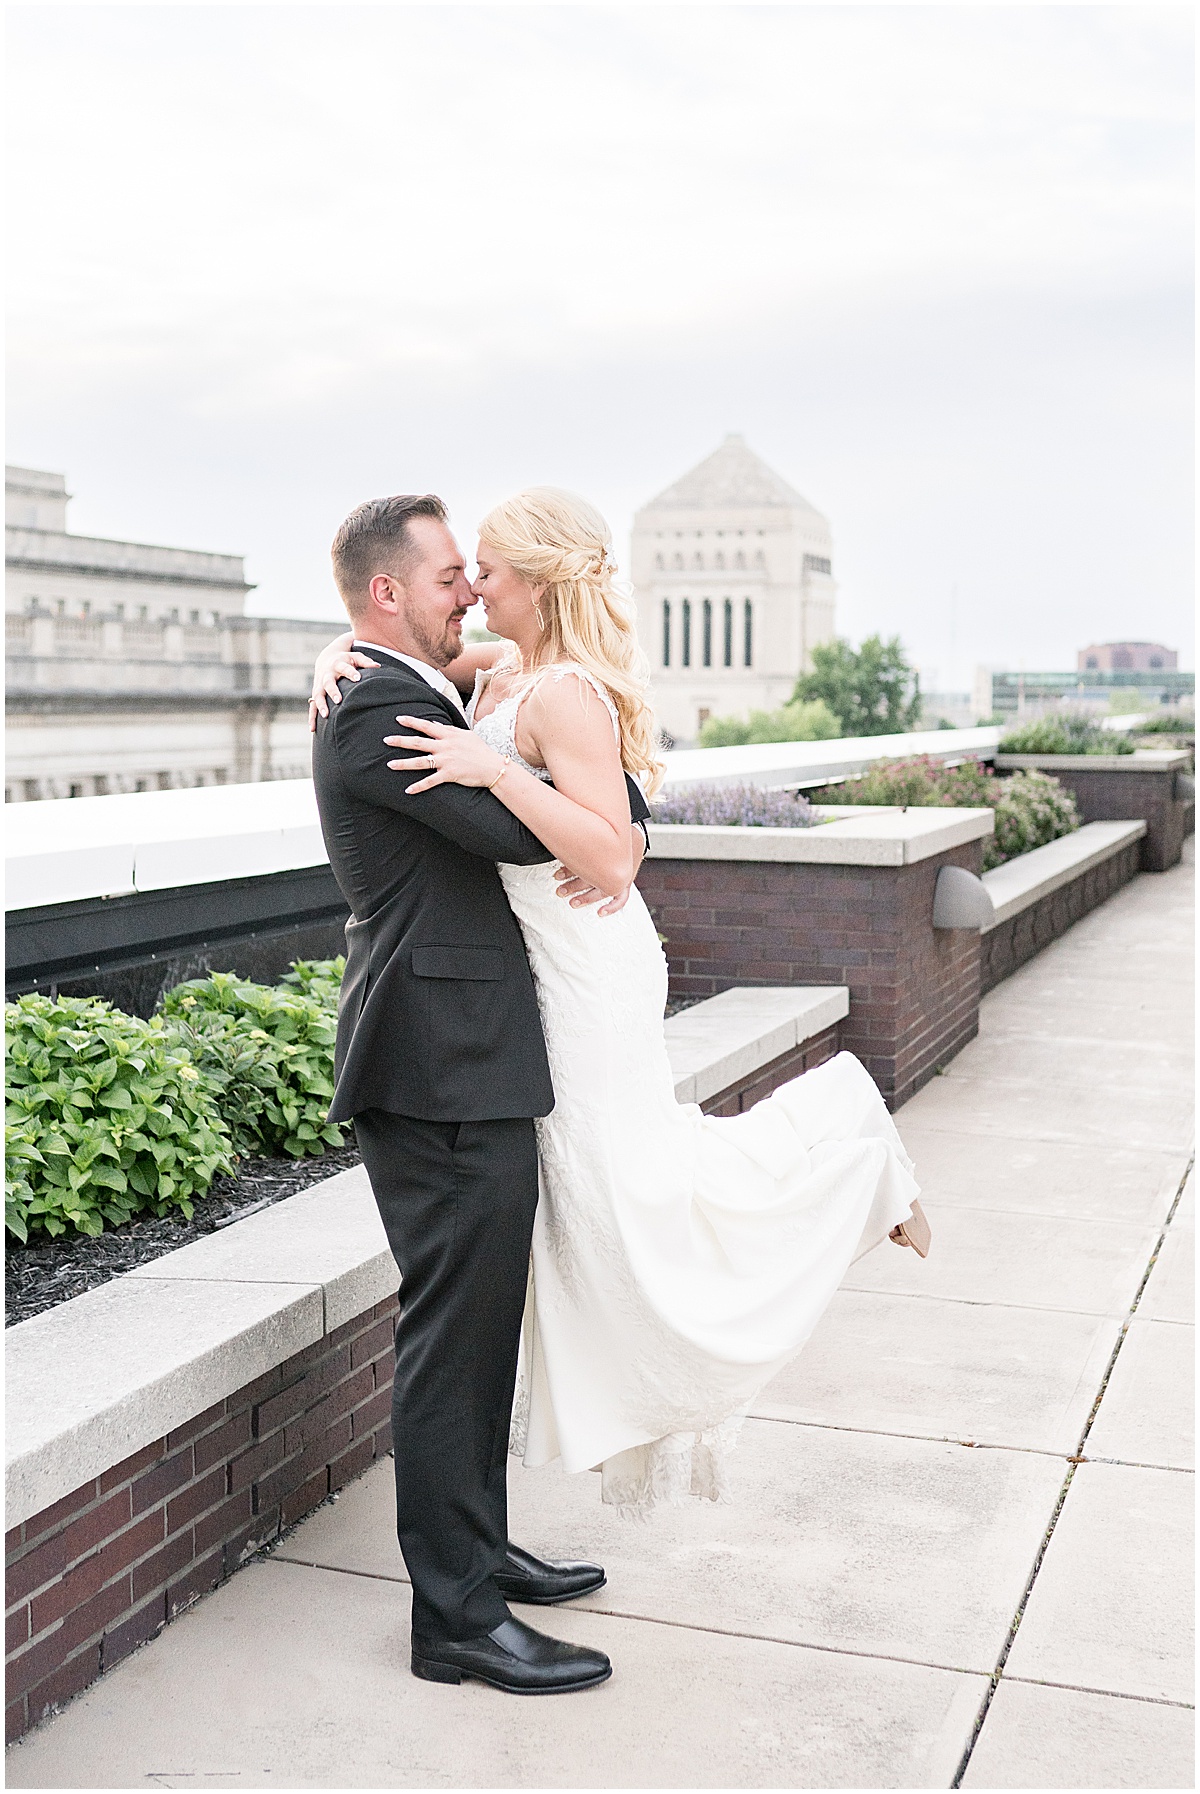 Mr. & Mrs. Mahoney: A Wedding at Duncan Hall in Lafayette, Indiana